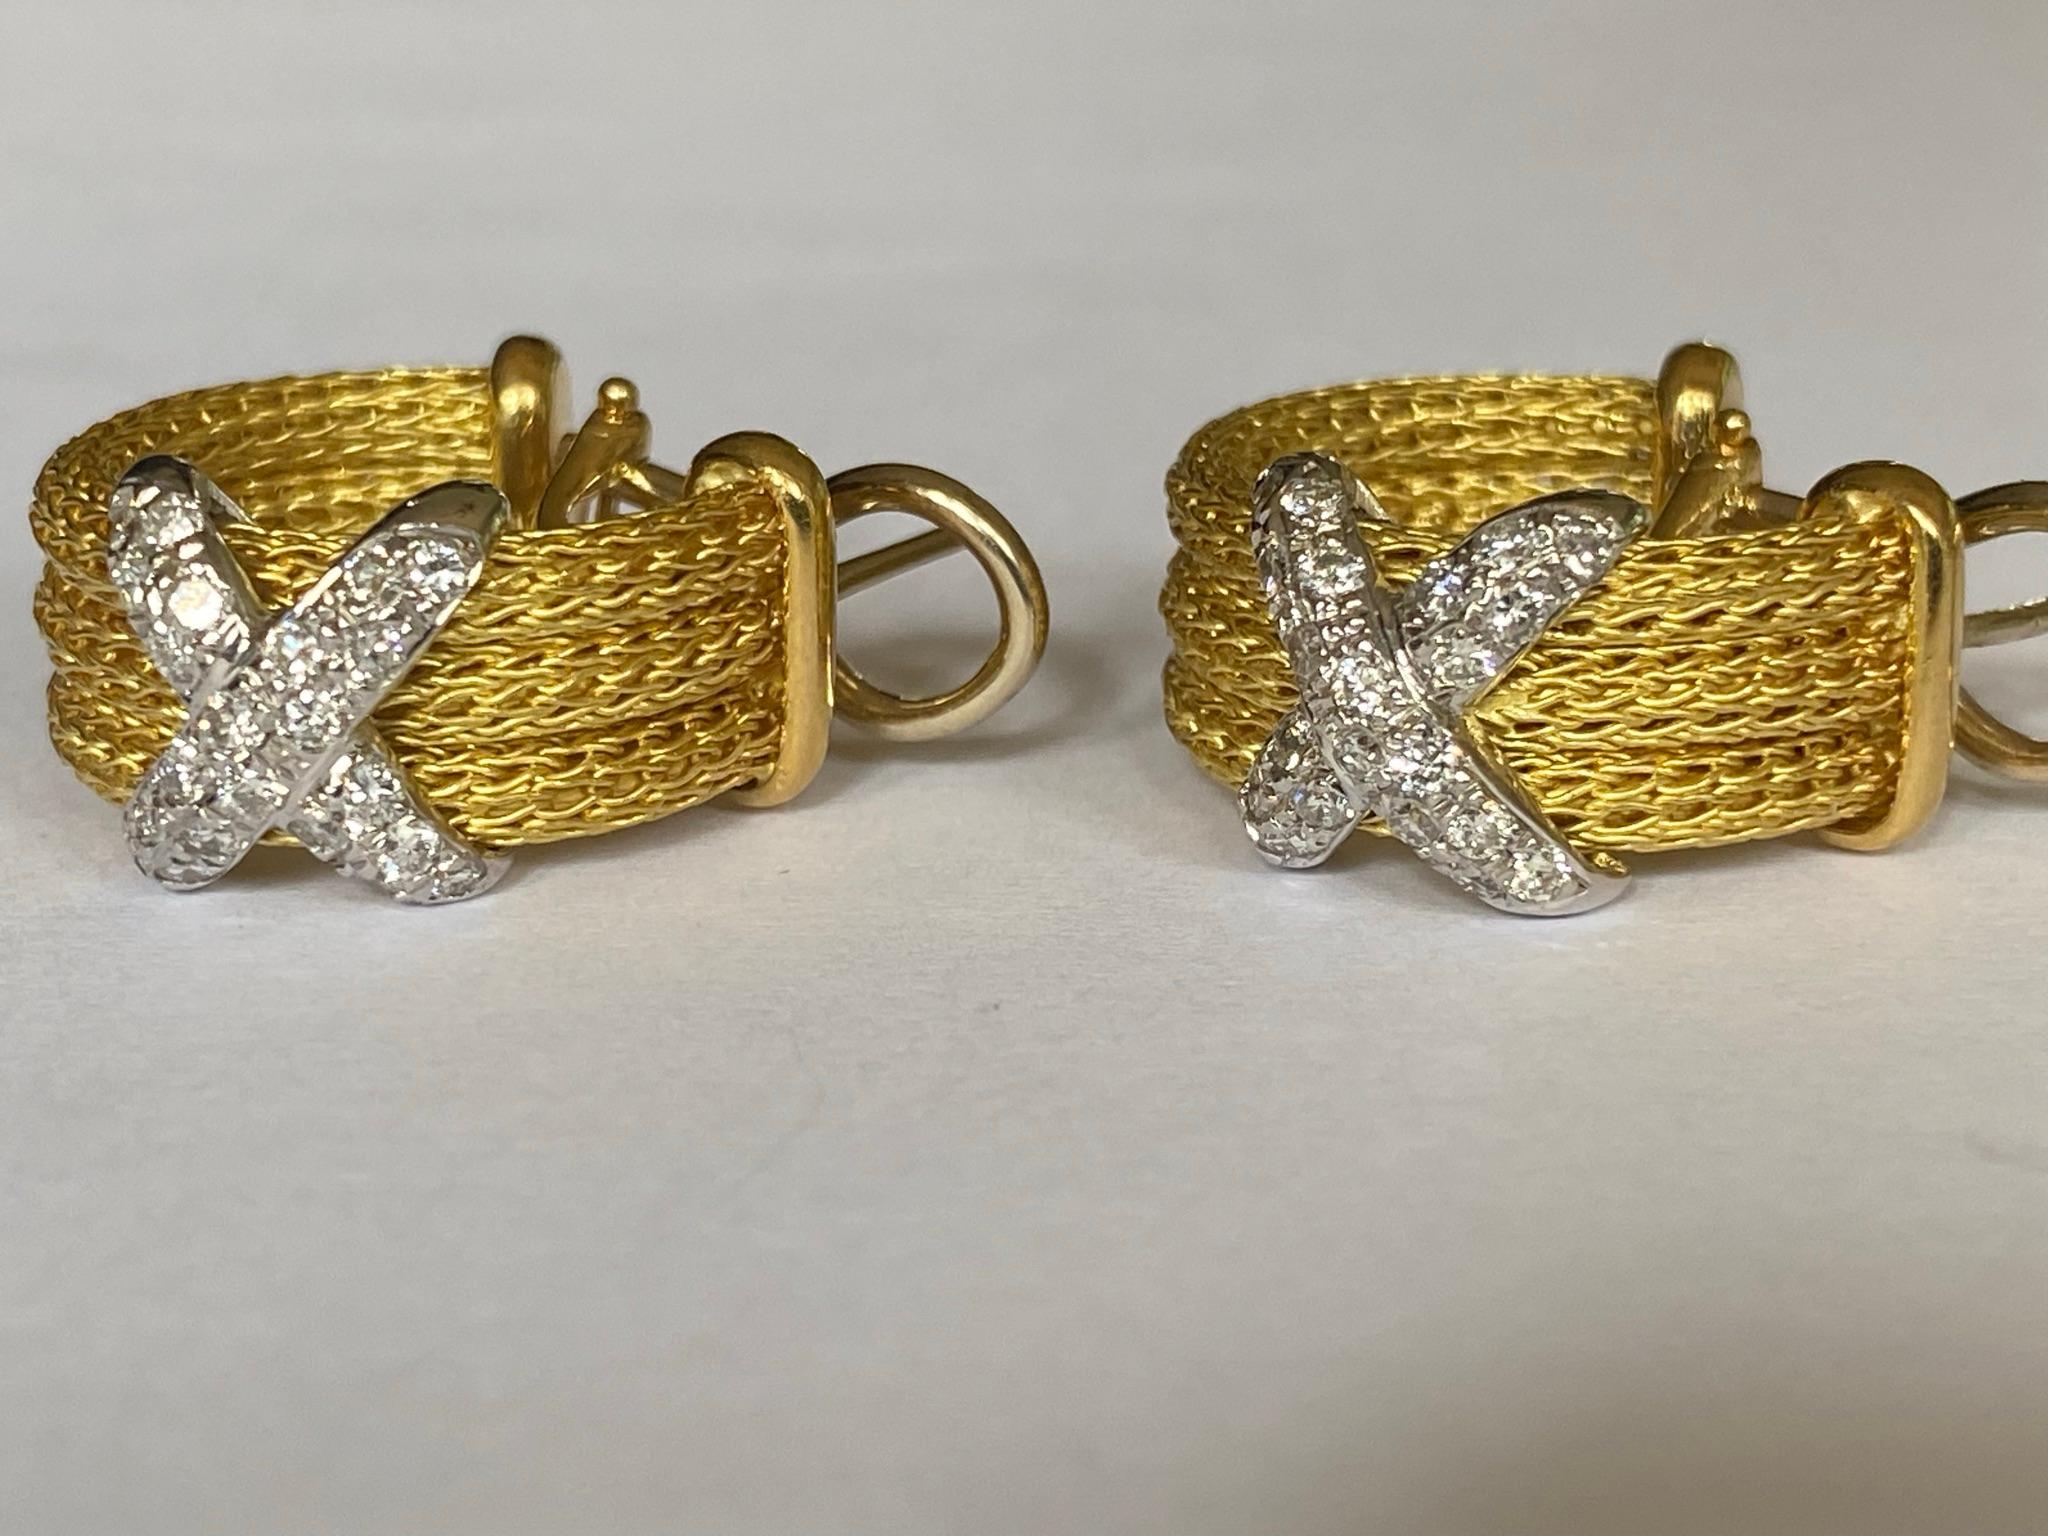 These two-tone Estate earrings feature three rows of 18kt yellow twisted gold rope overlaid by a crisscross of twenty-two round diamonds set in 18kt white gold and secured with Omega backs. The total diamond weight is approximately 1.00 carat. 

